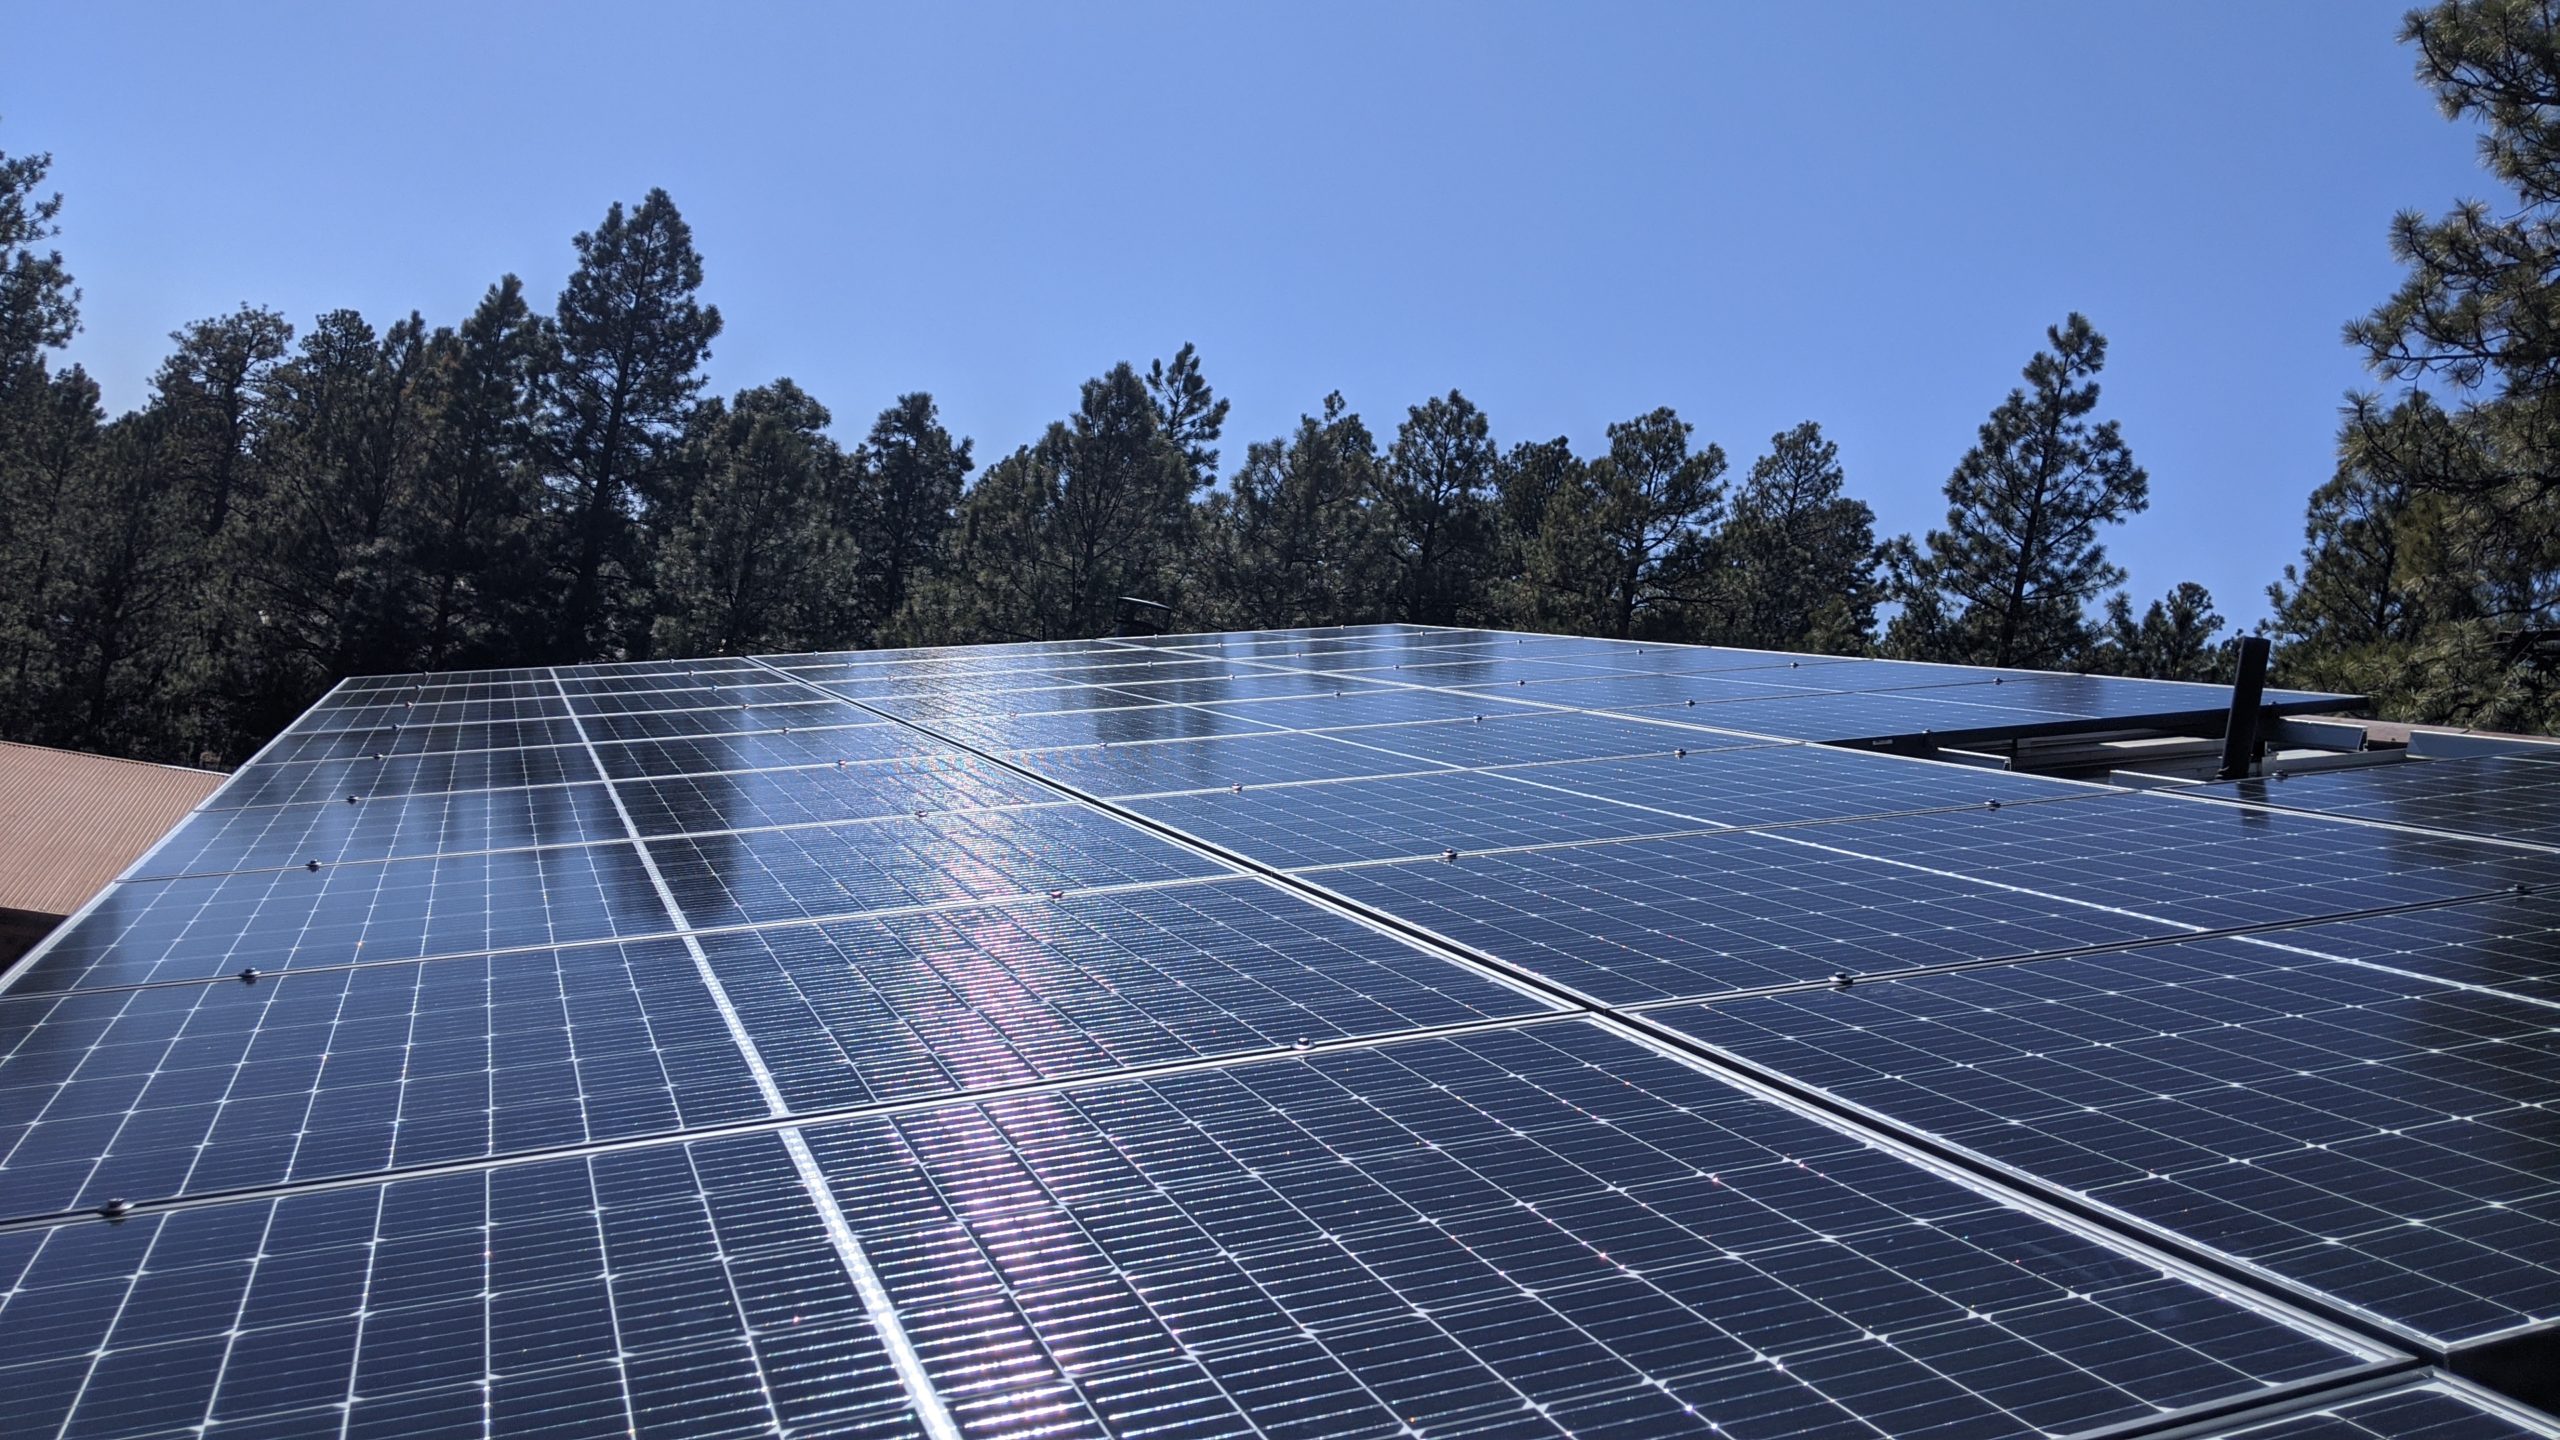 Solar panels in front of pine trees in Flagstaff, Arizona.